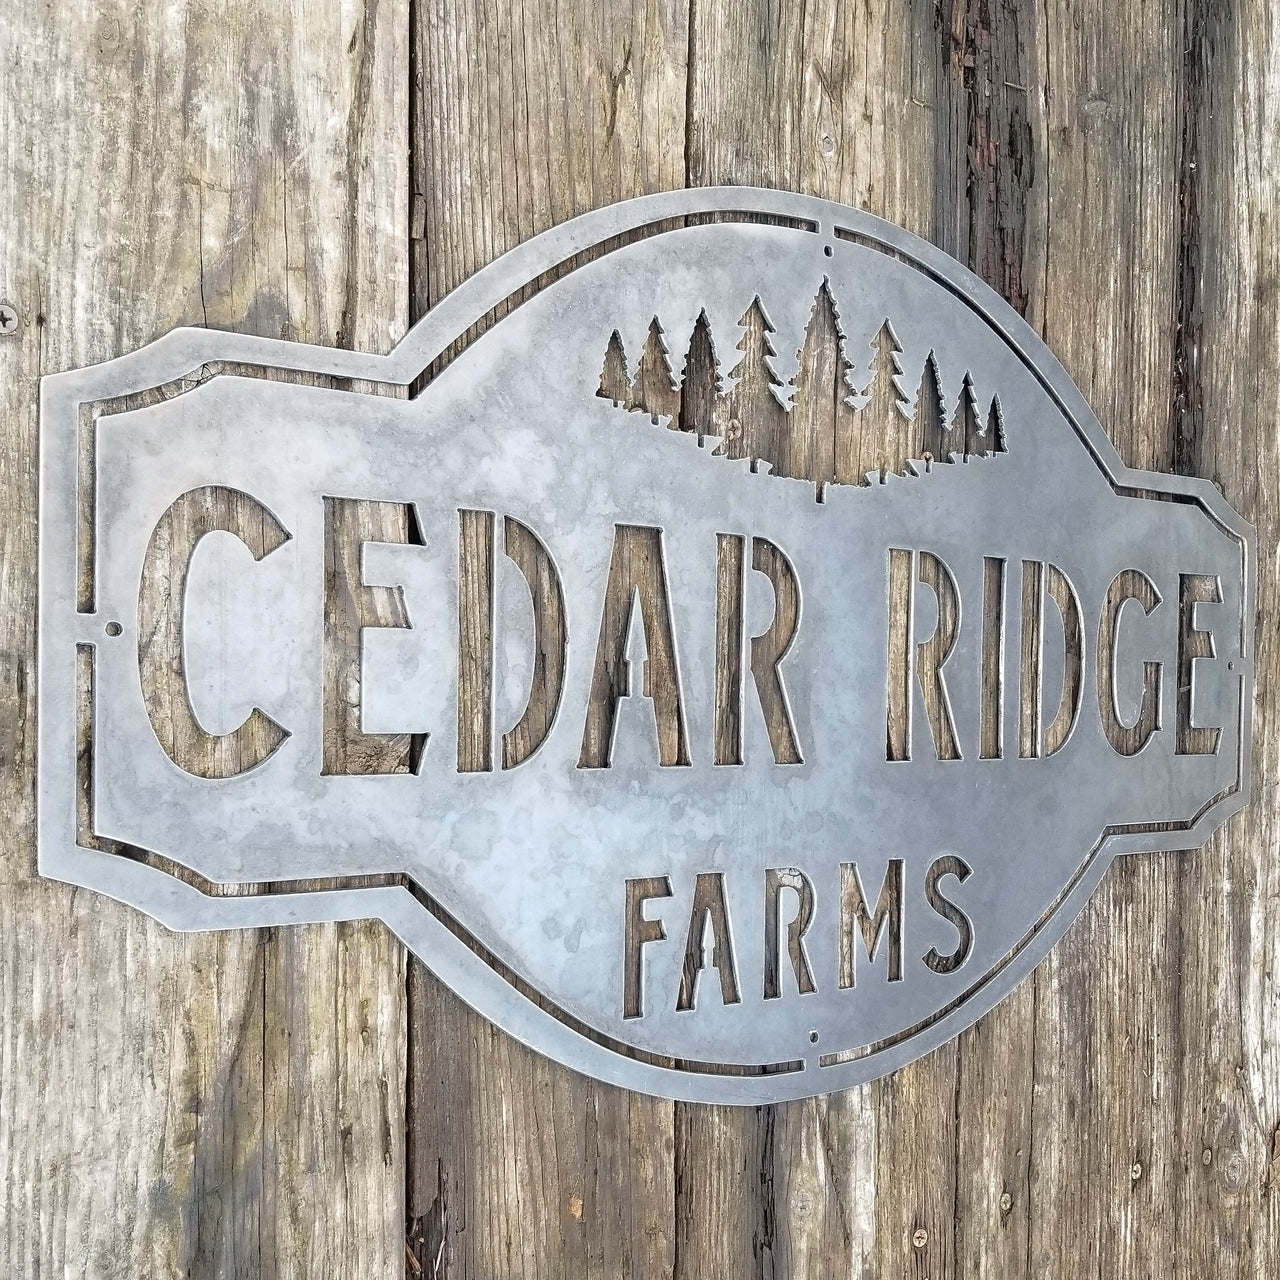 This is a rustic metal sign showcasing an image of trees at the top. The sign reads, "Cedar Ridge Farms".